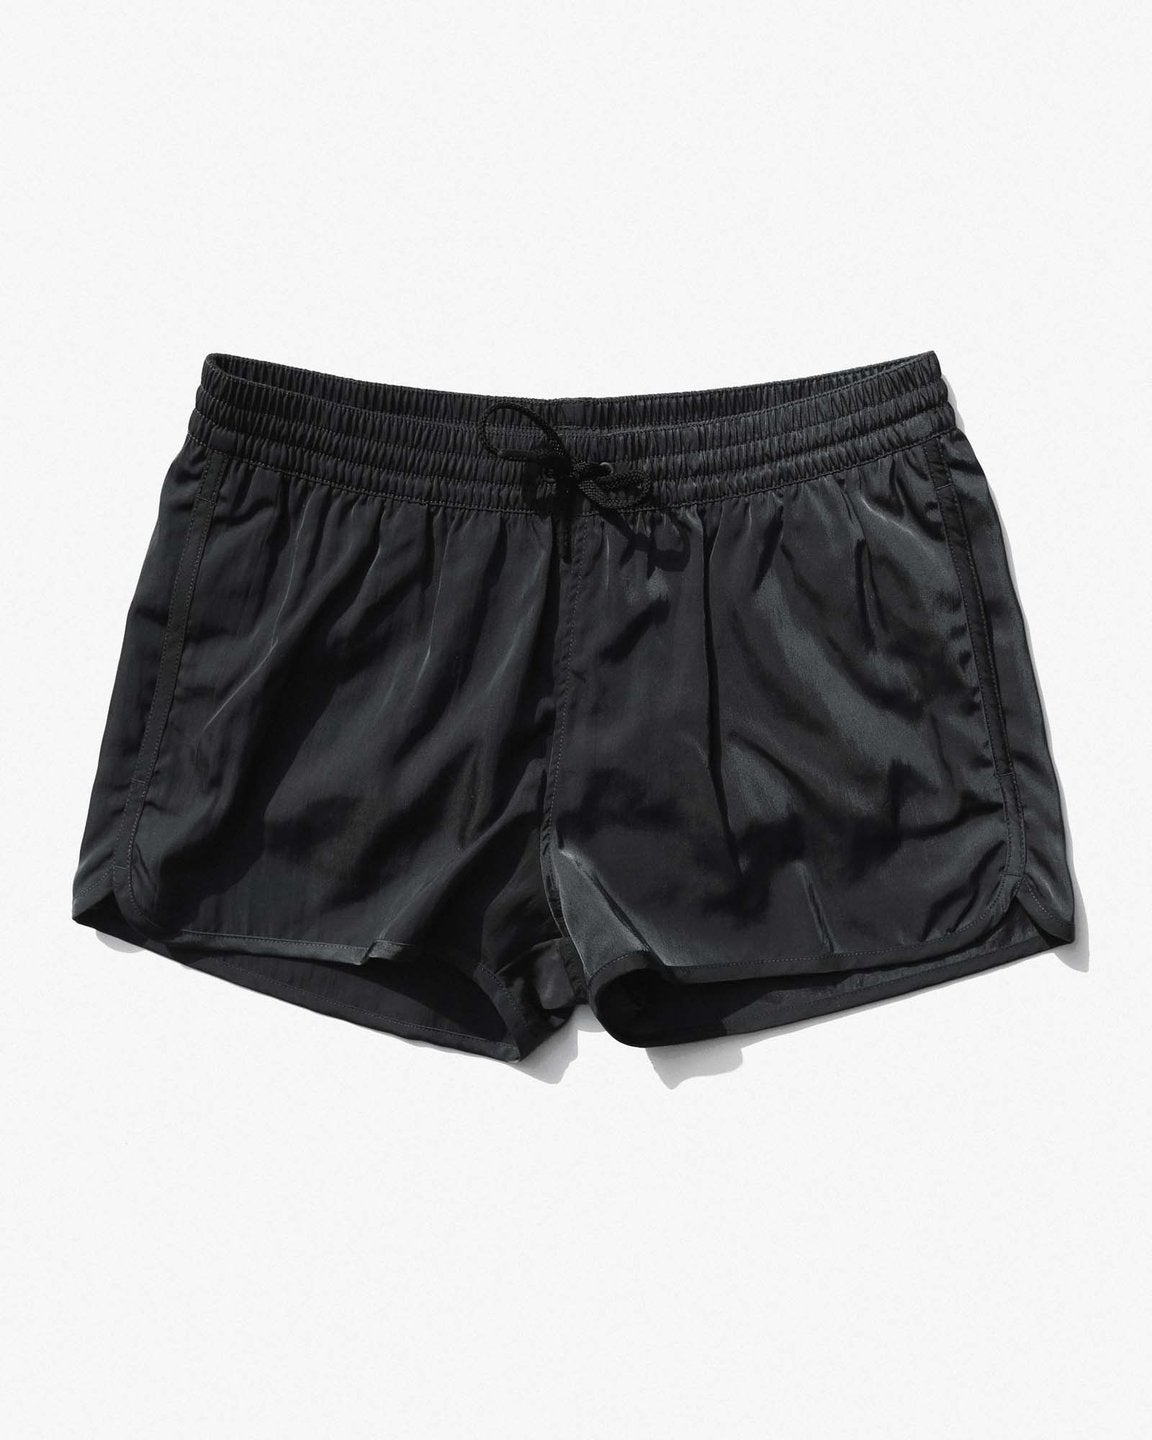 The Summer Of Thirst Trap Short Shorts For Men Is Here